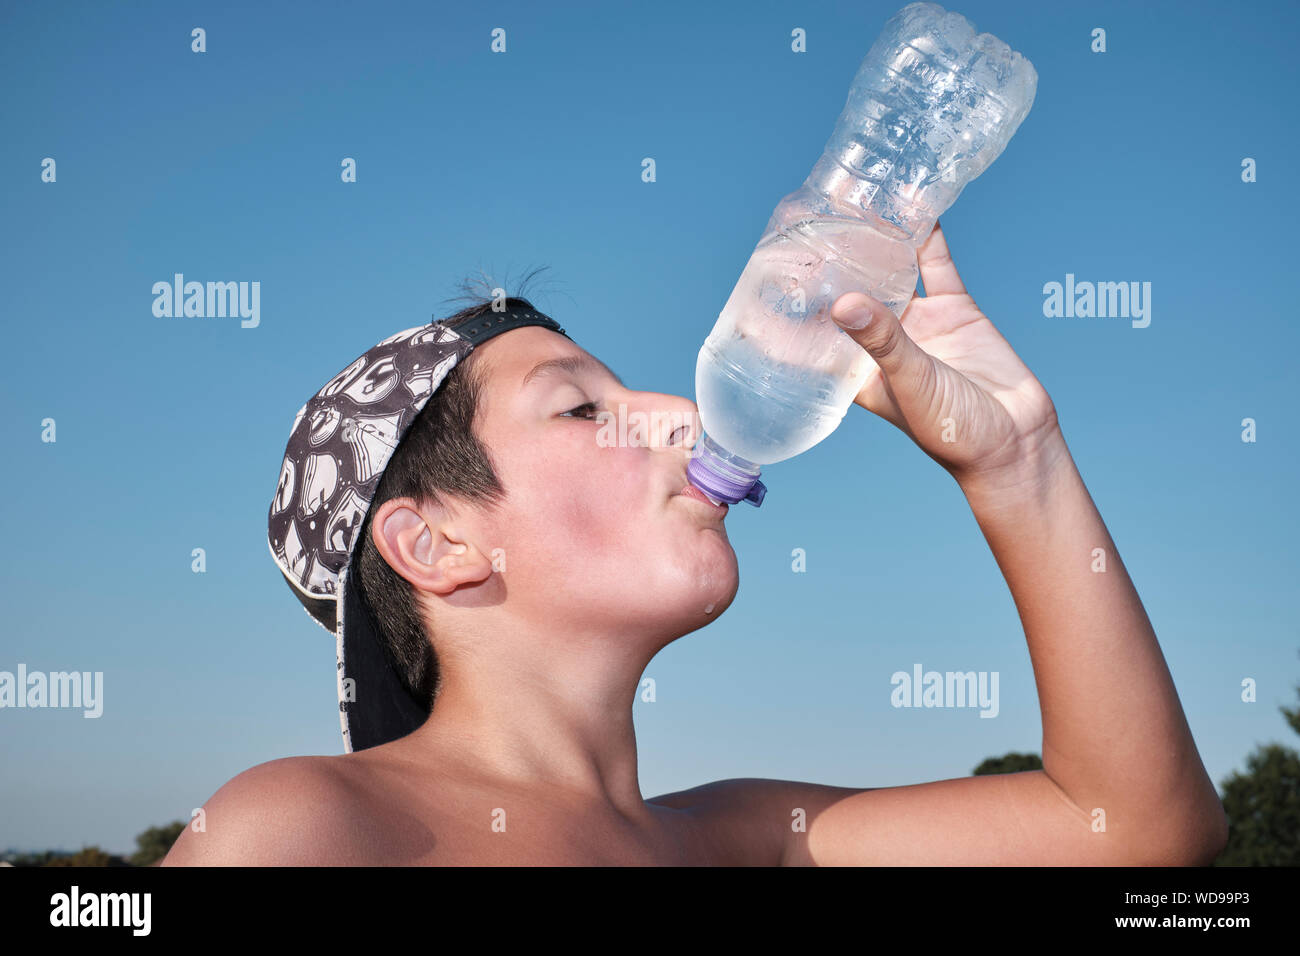 Boy, 11-12 years old, driks ice cold water from plastic bottle on a hot summer day Stock Photo